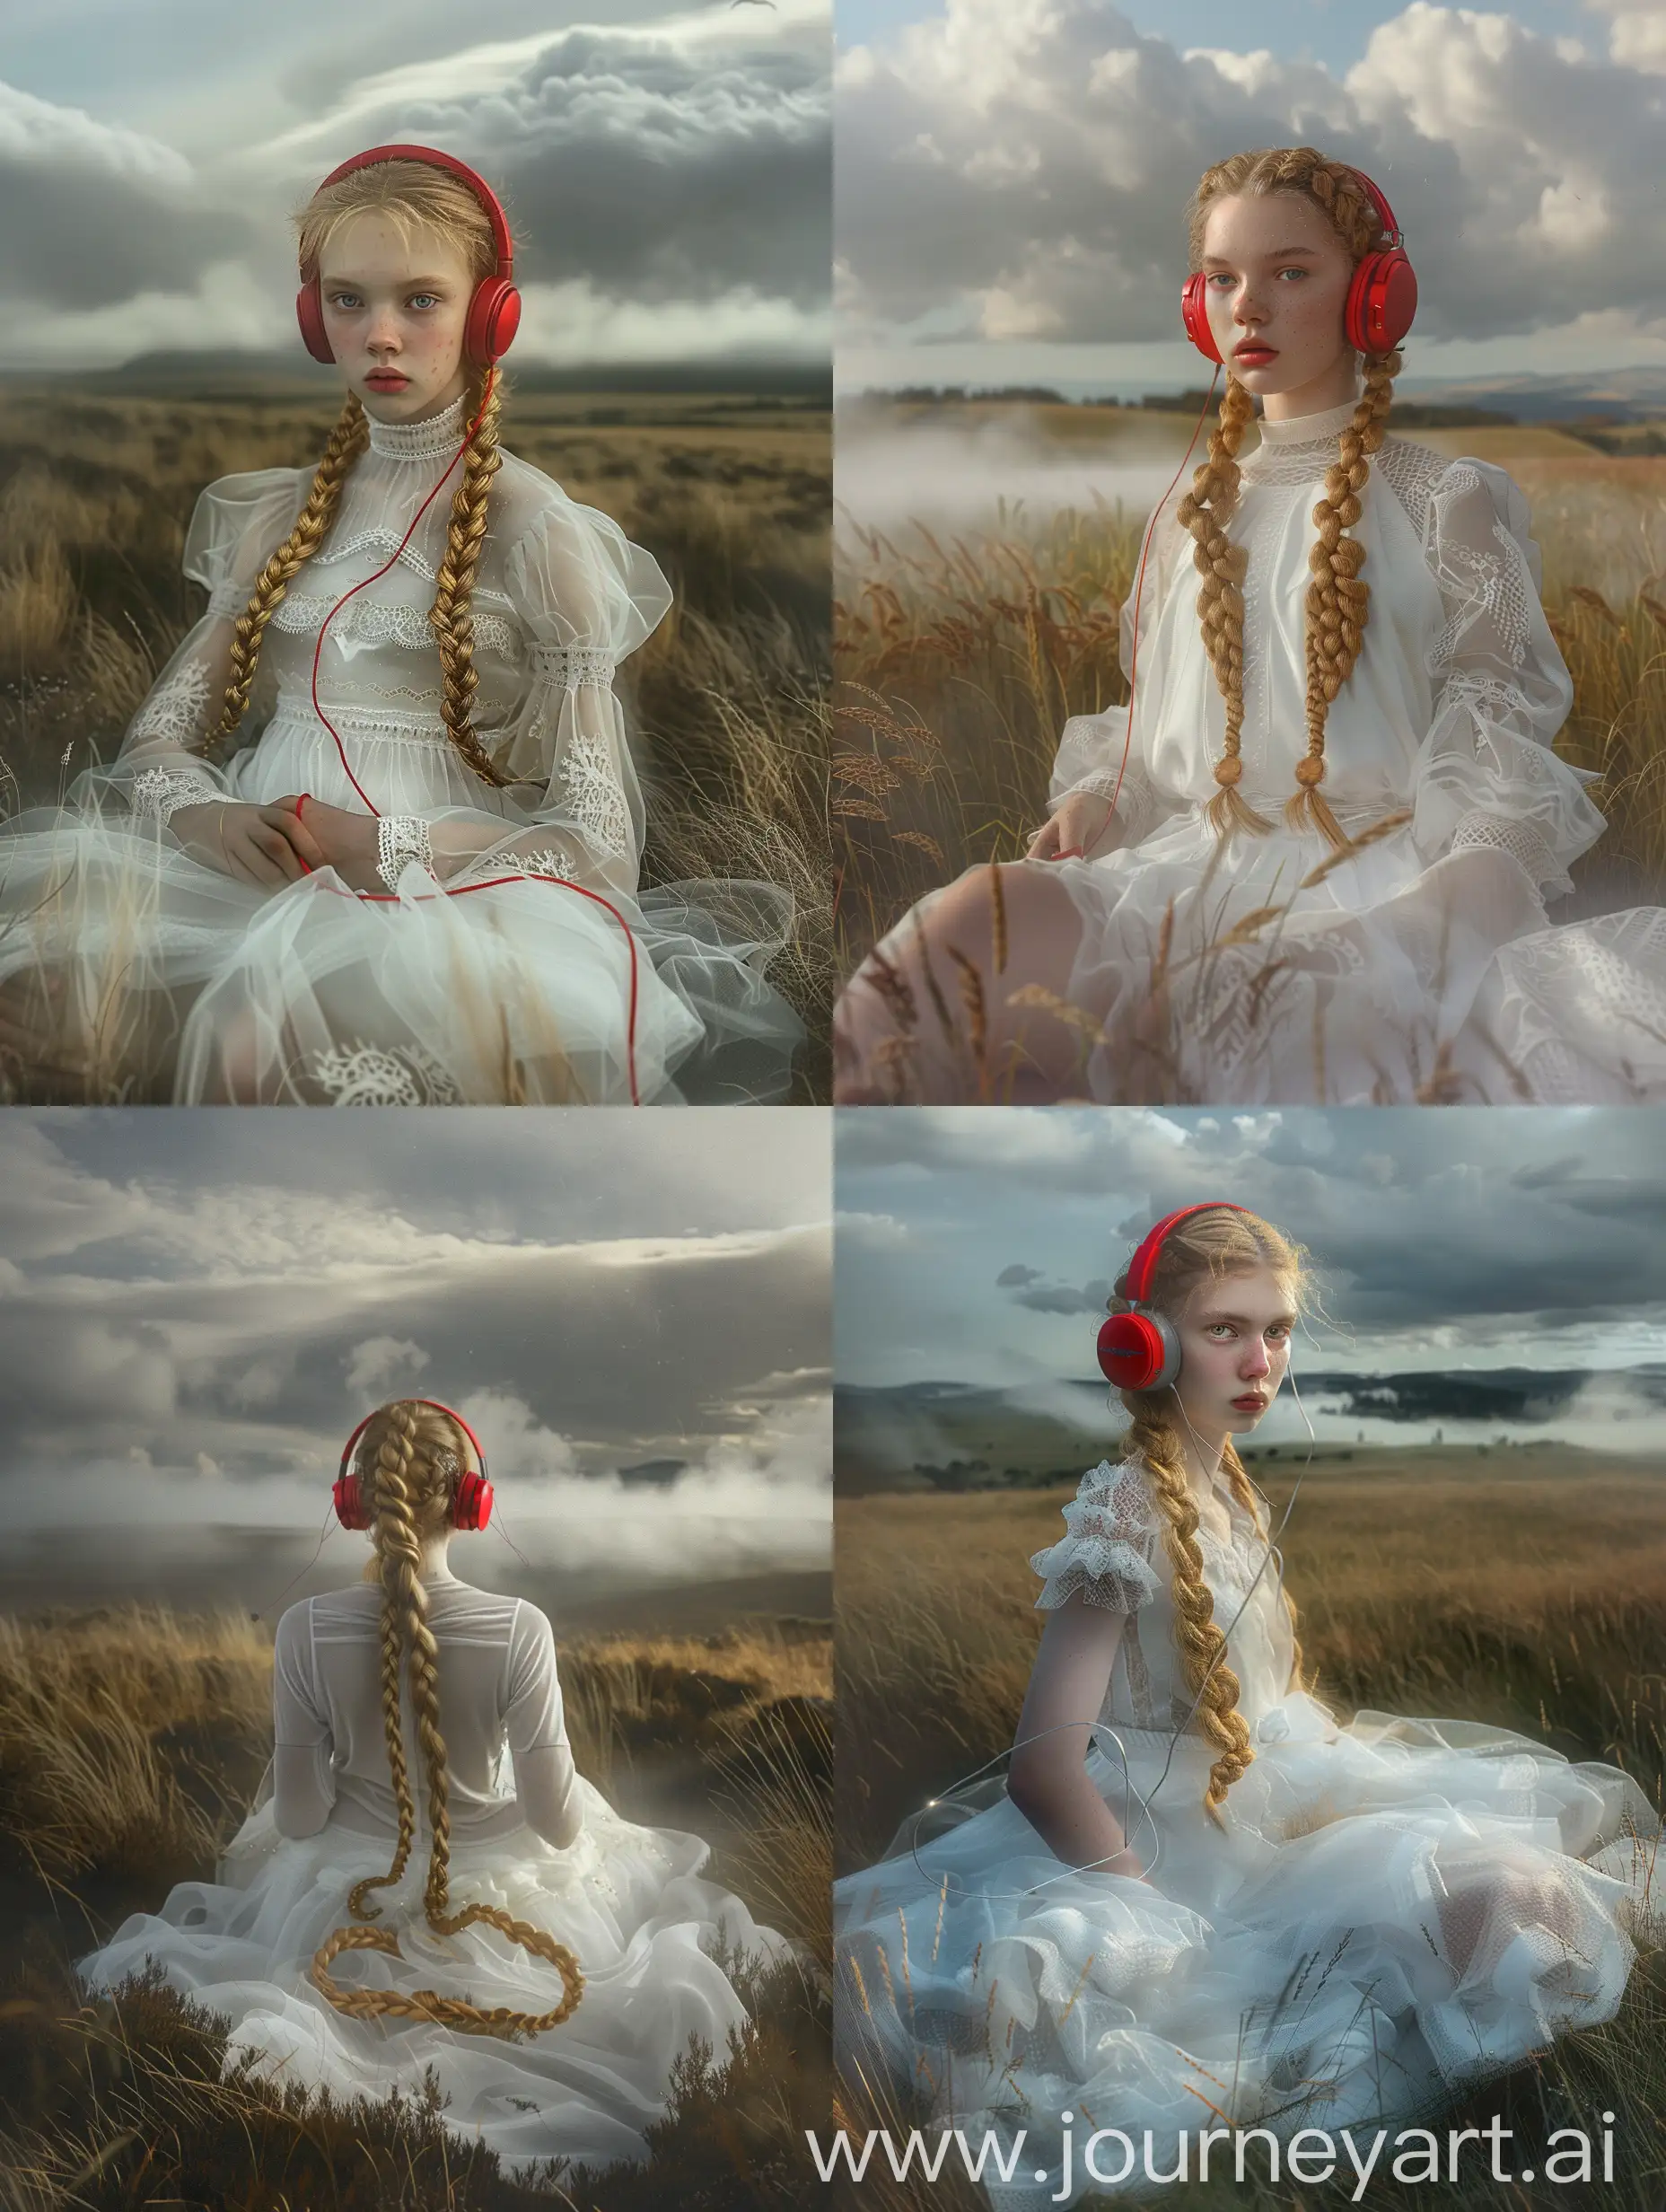 Girl-with-Golden-Braided-Hair-in-Scottish-Landscape-Wearing-Red-Headphones